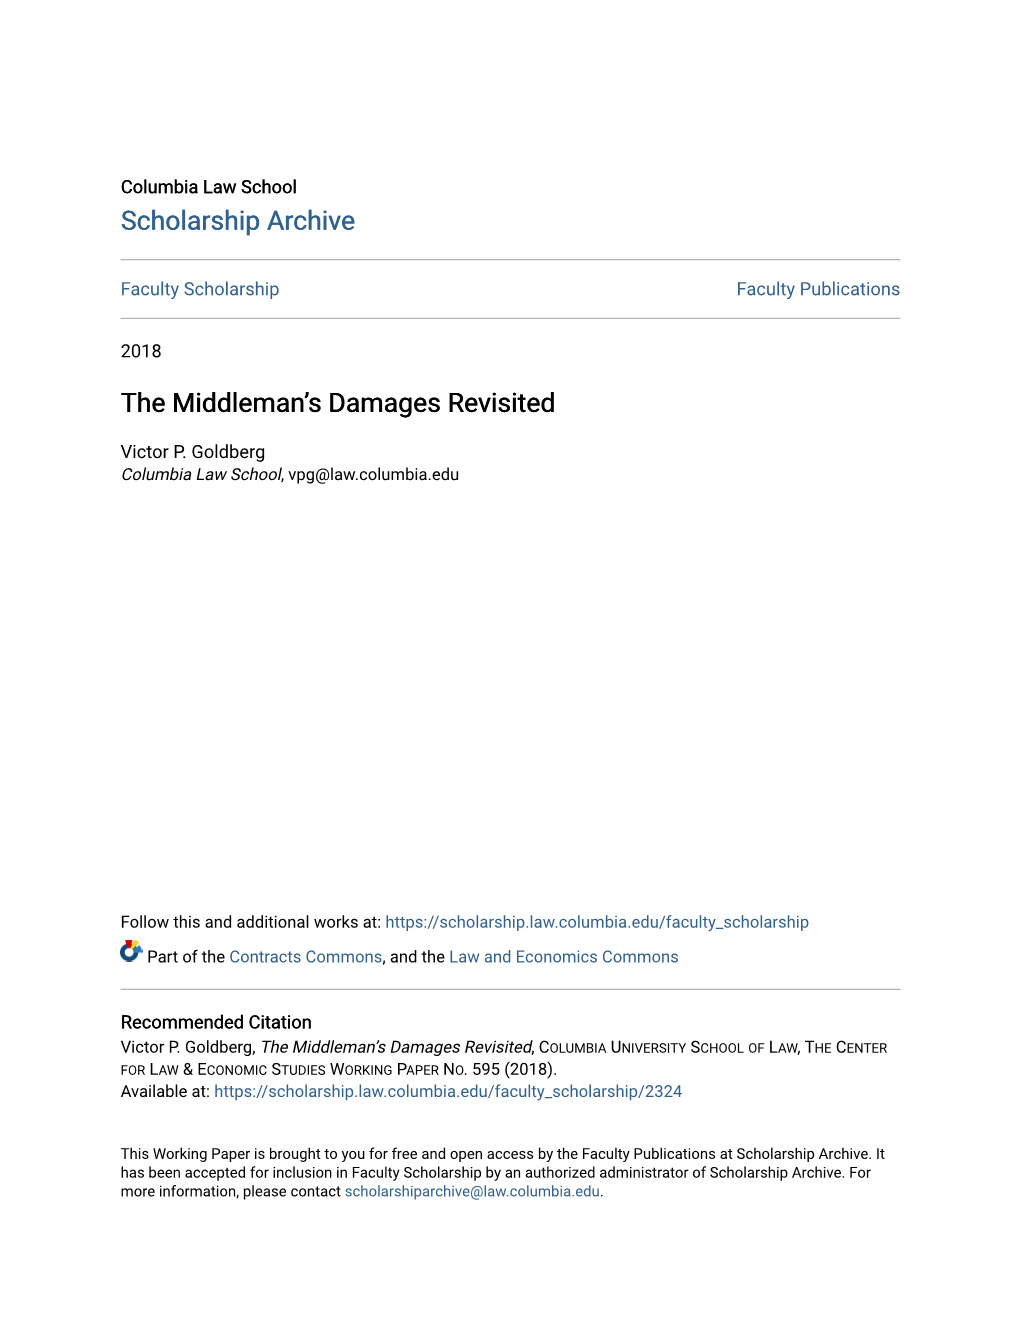 The Middleman's Damages Revisited